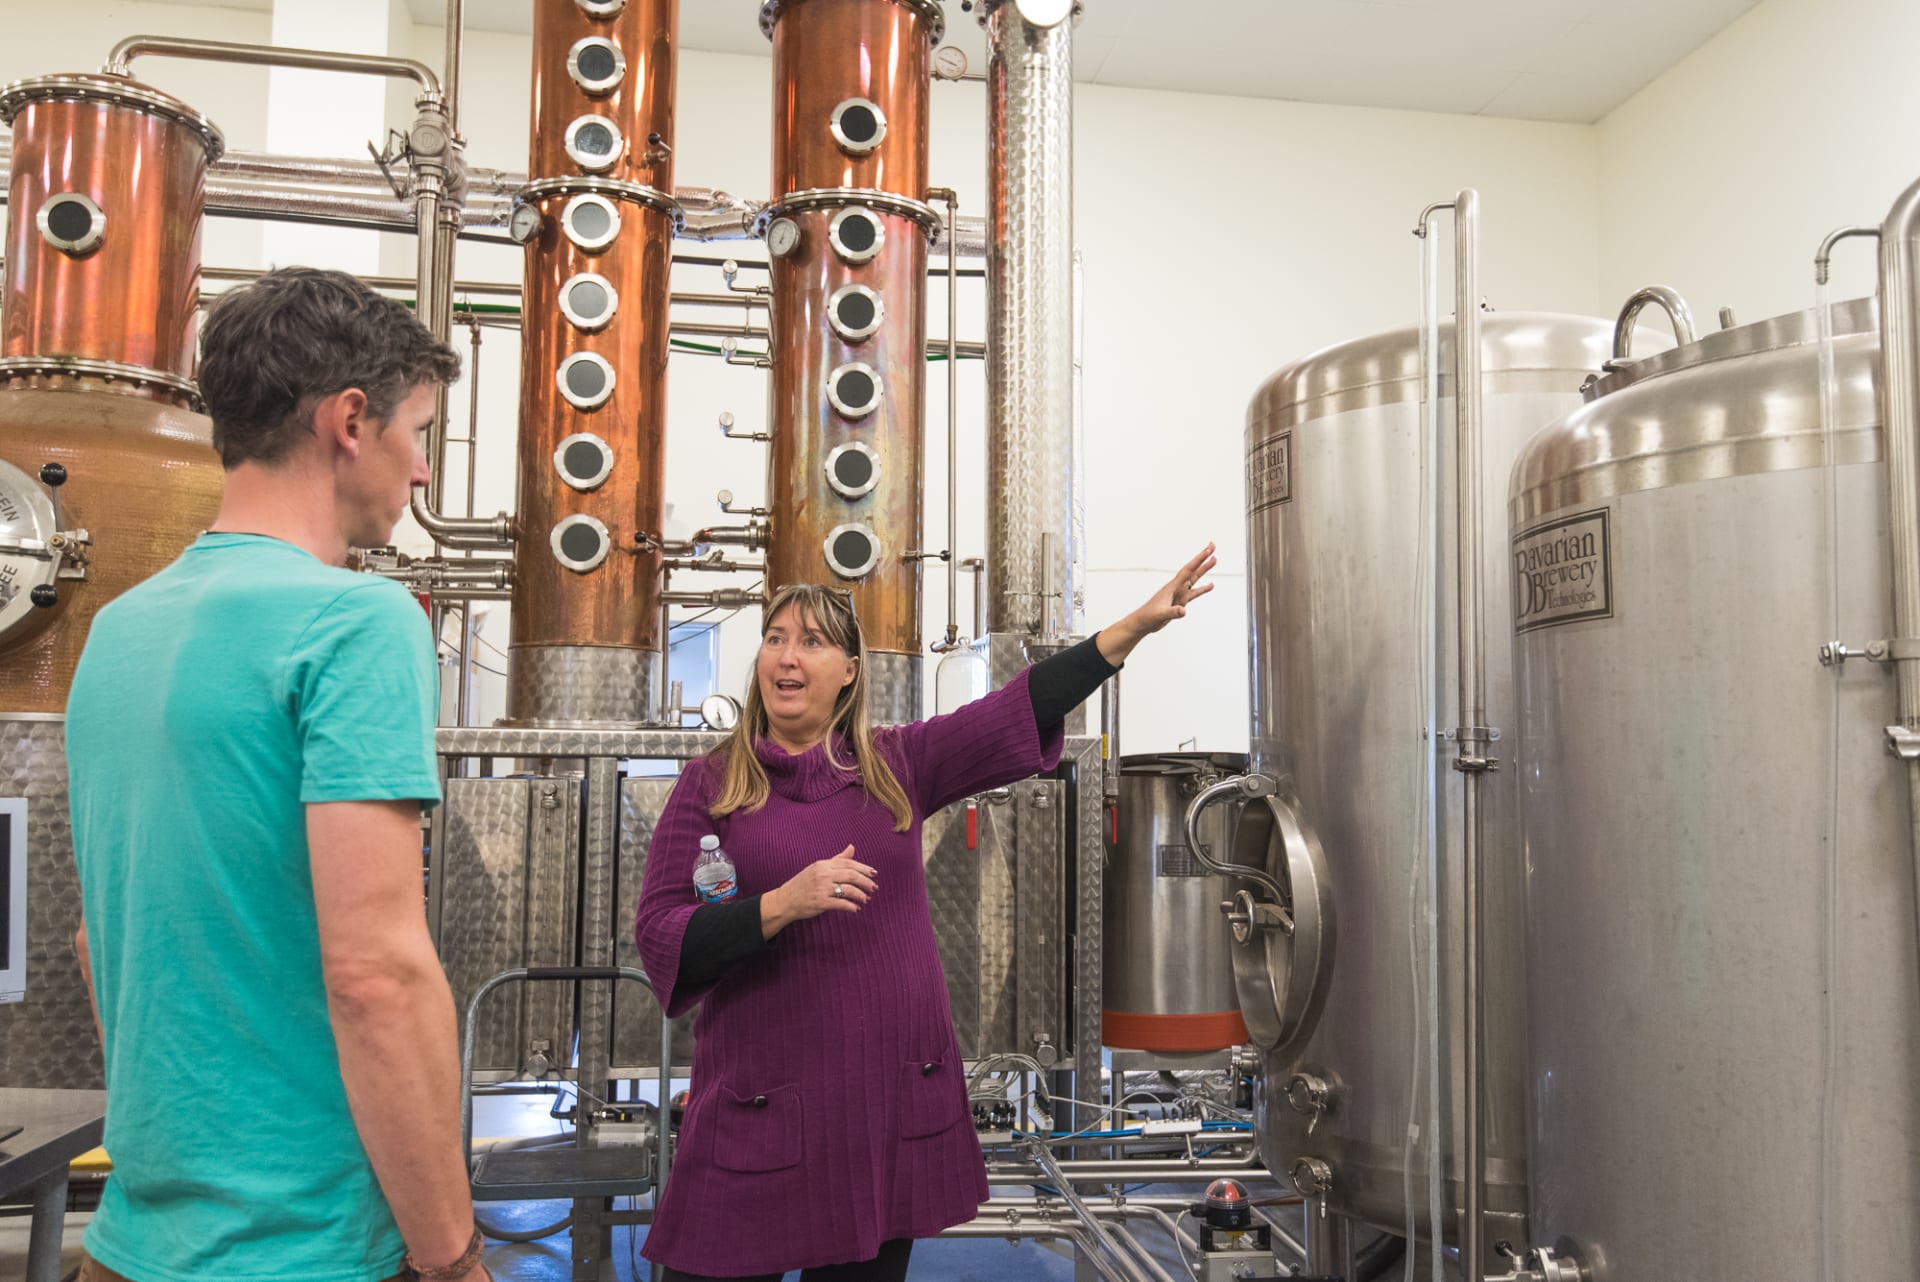 Tour of the distillery with owner Deborah.